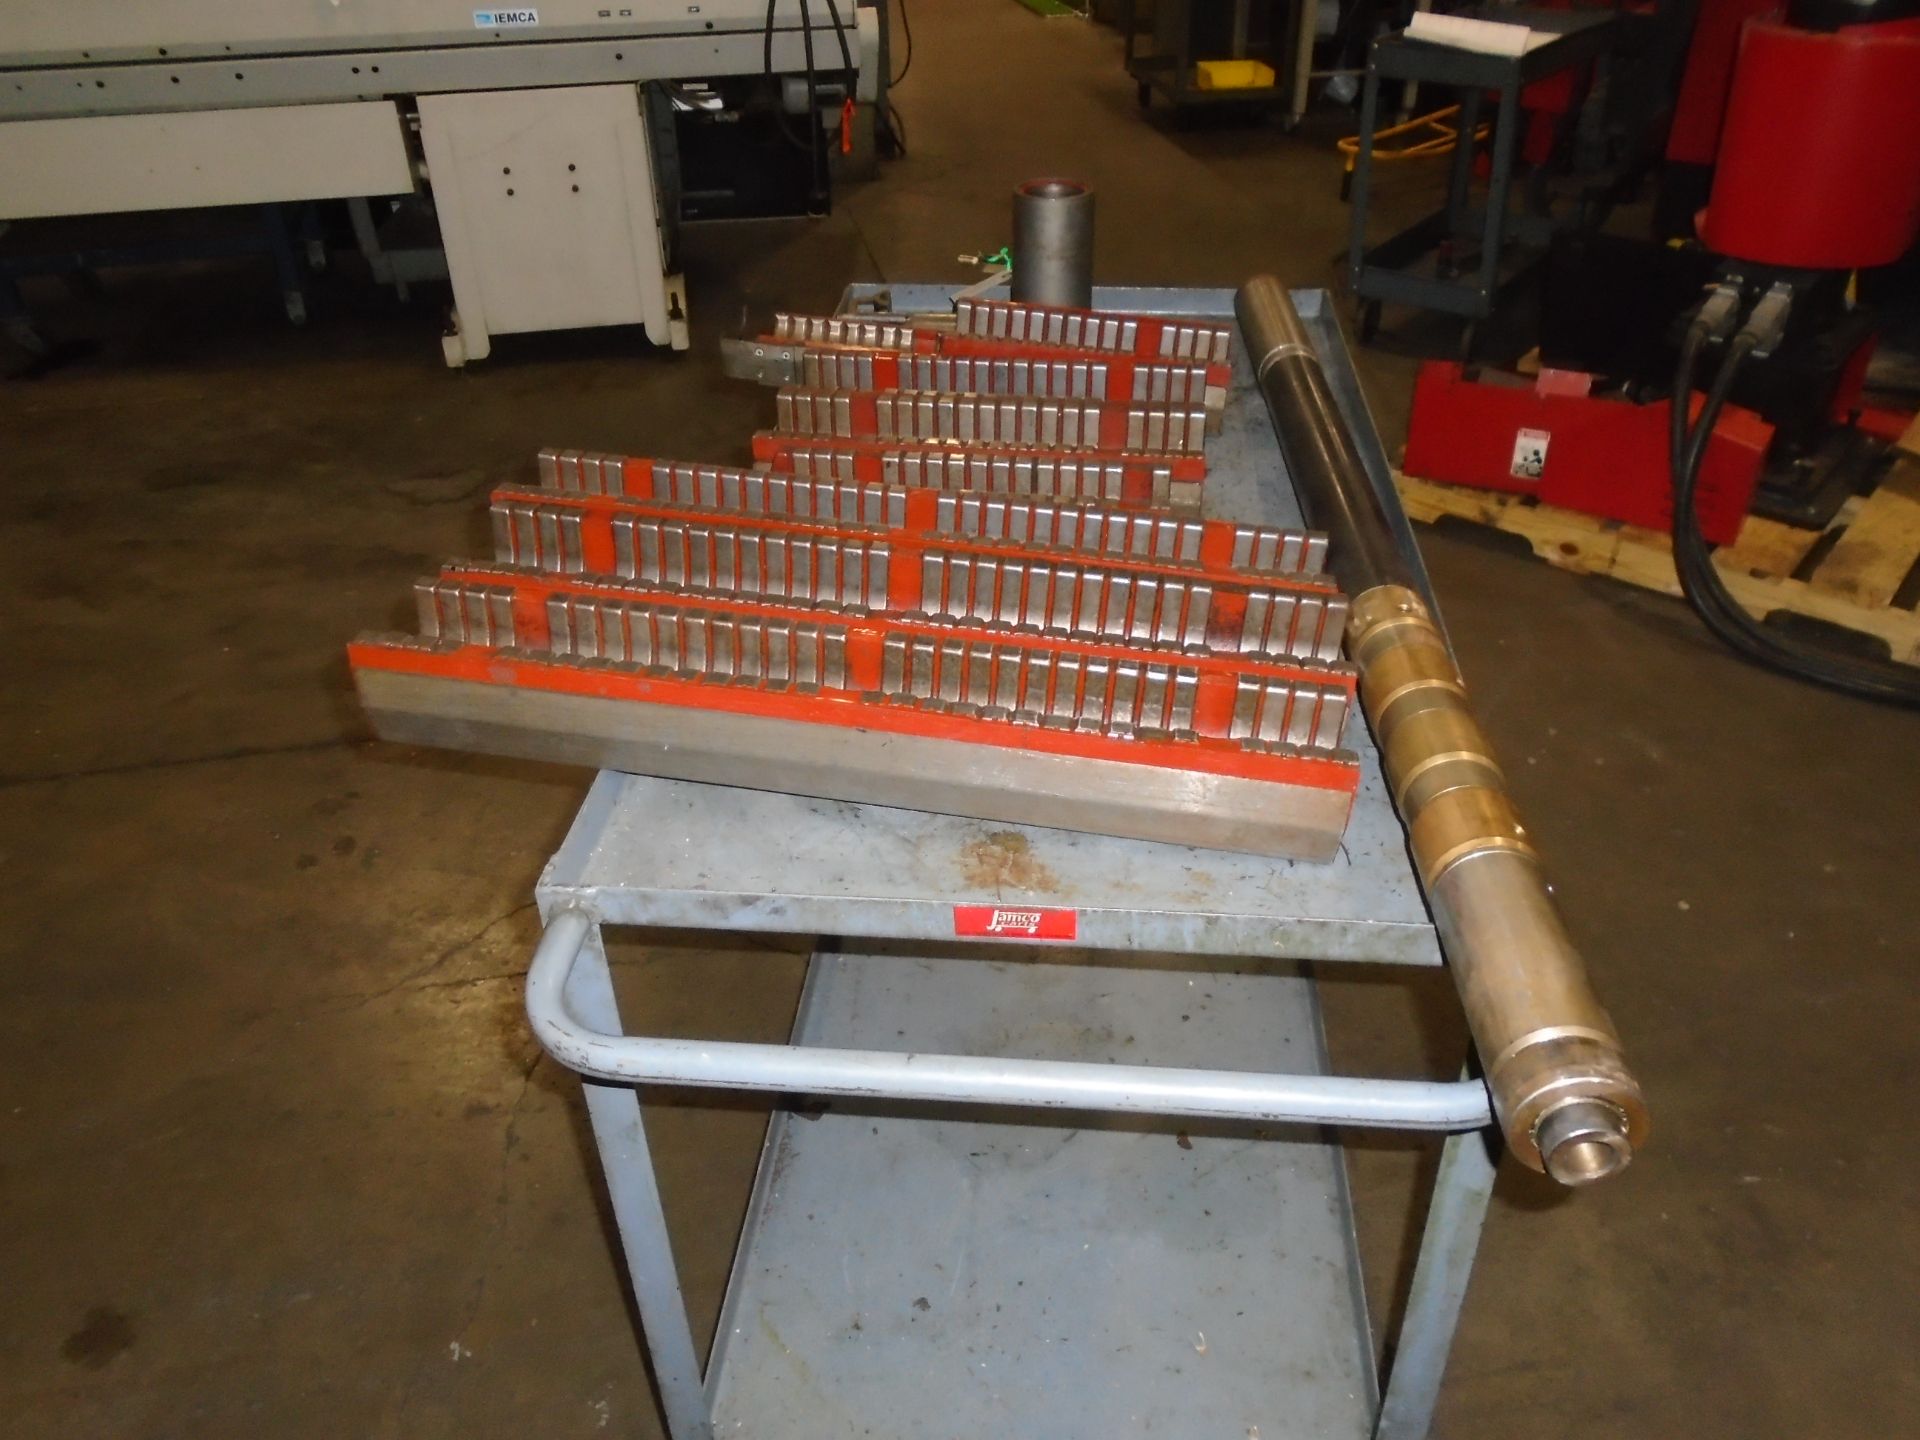 Iemca Master 880r-P-E Bar loader 3” Channels With Pusher & BracketsStock 12147 - Image 2 of 7